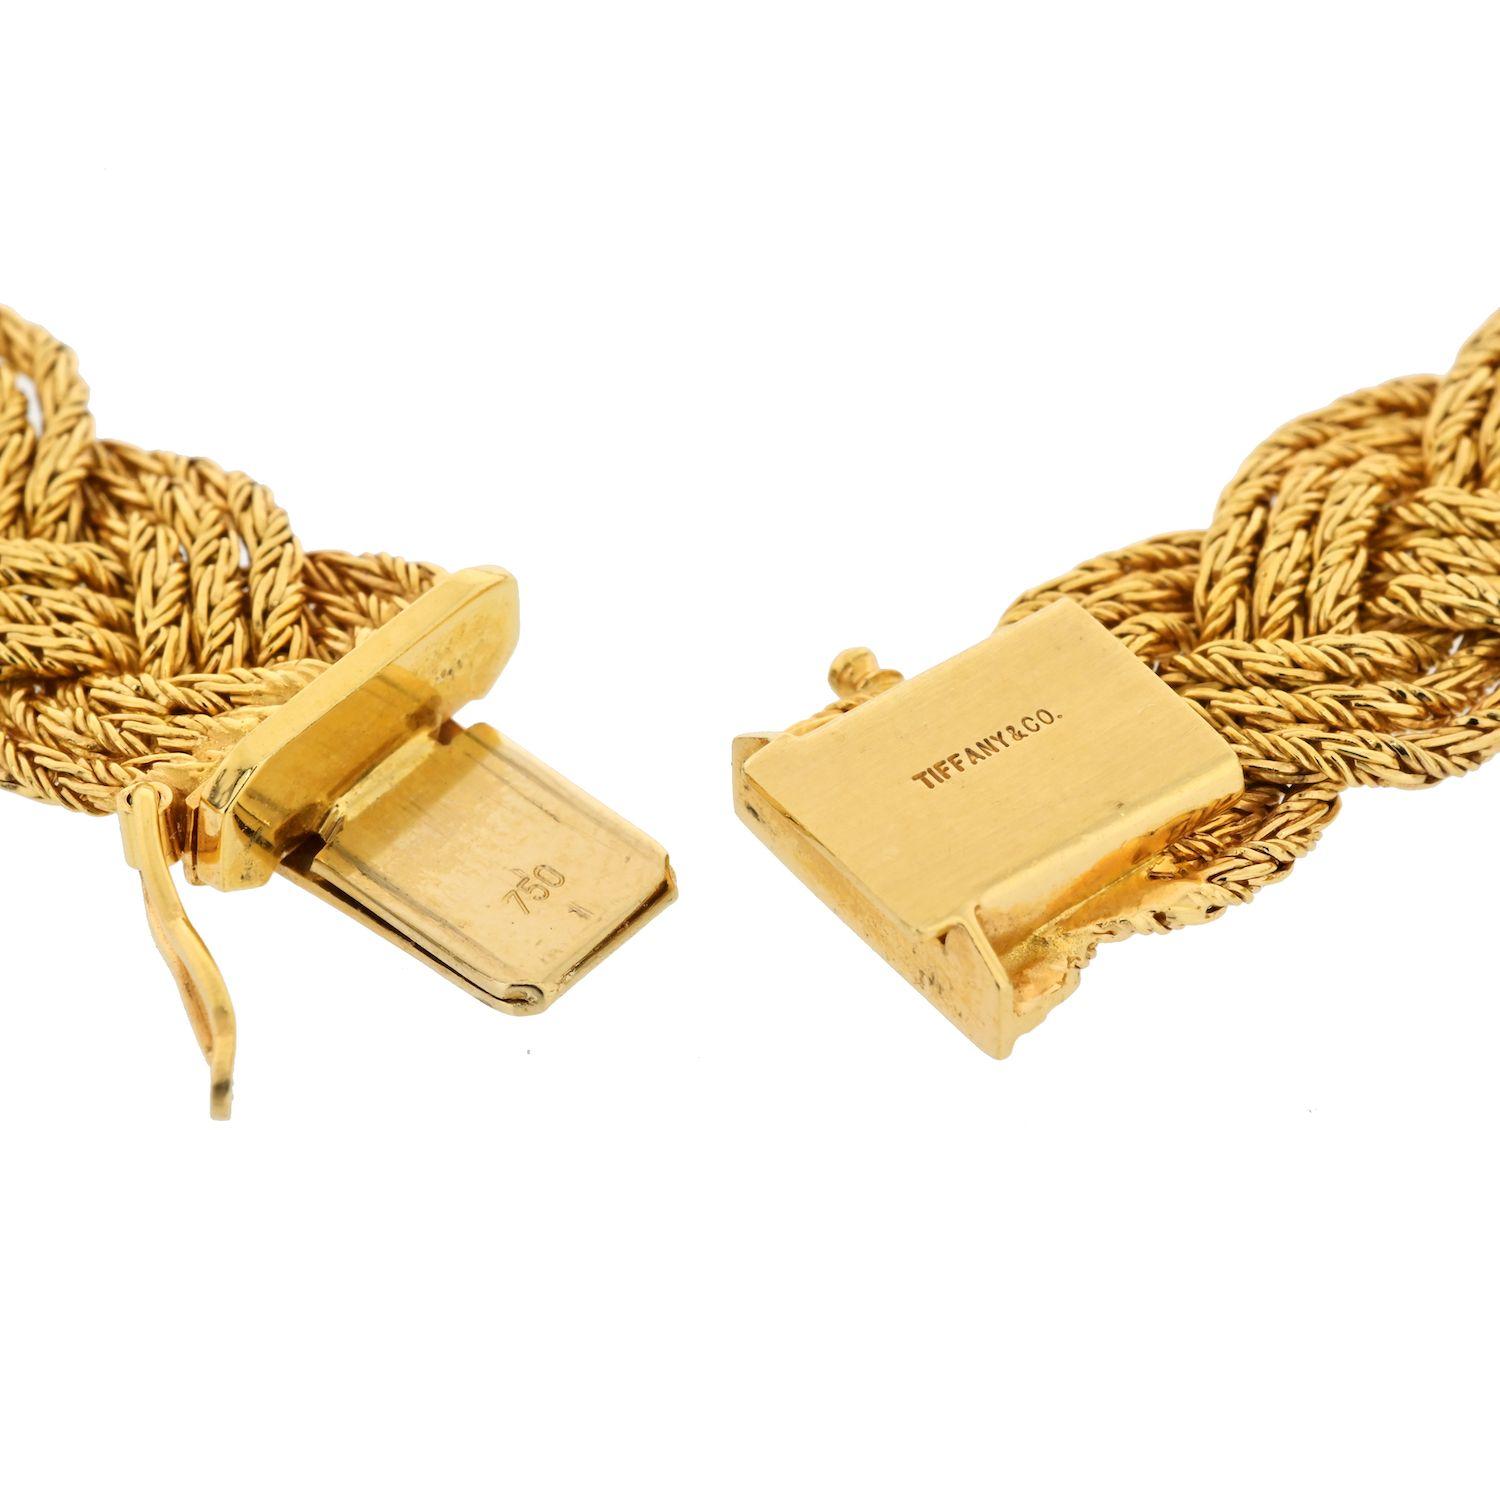 Lovely vintage Tiffany & Co. 18K Yellow Gold Necklace. Styled as a woven braid it lays comfortable and stylish on the neckbone same way as it was worn 40 years ago. 
Excellent condition this necklace is perfect for everyday as well as special